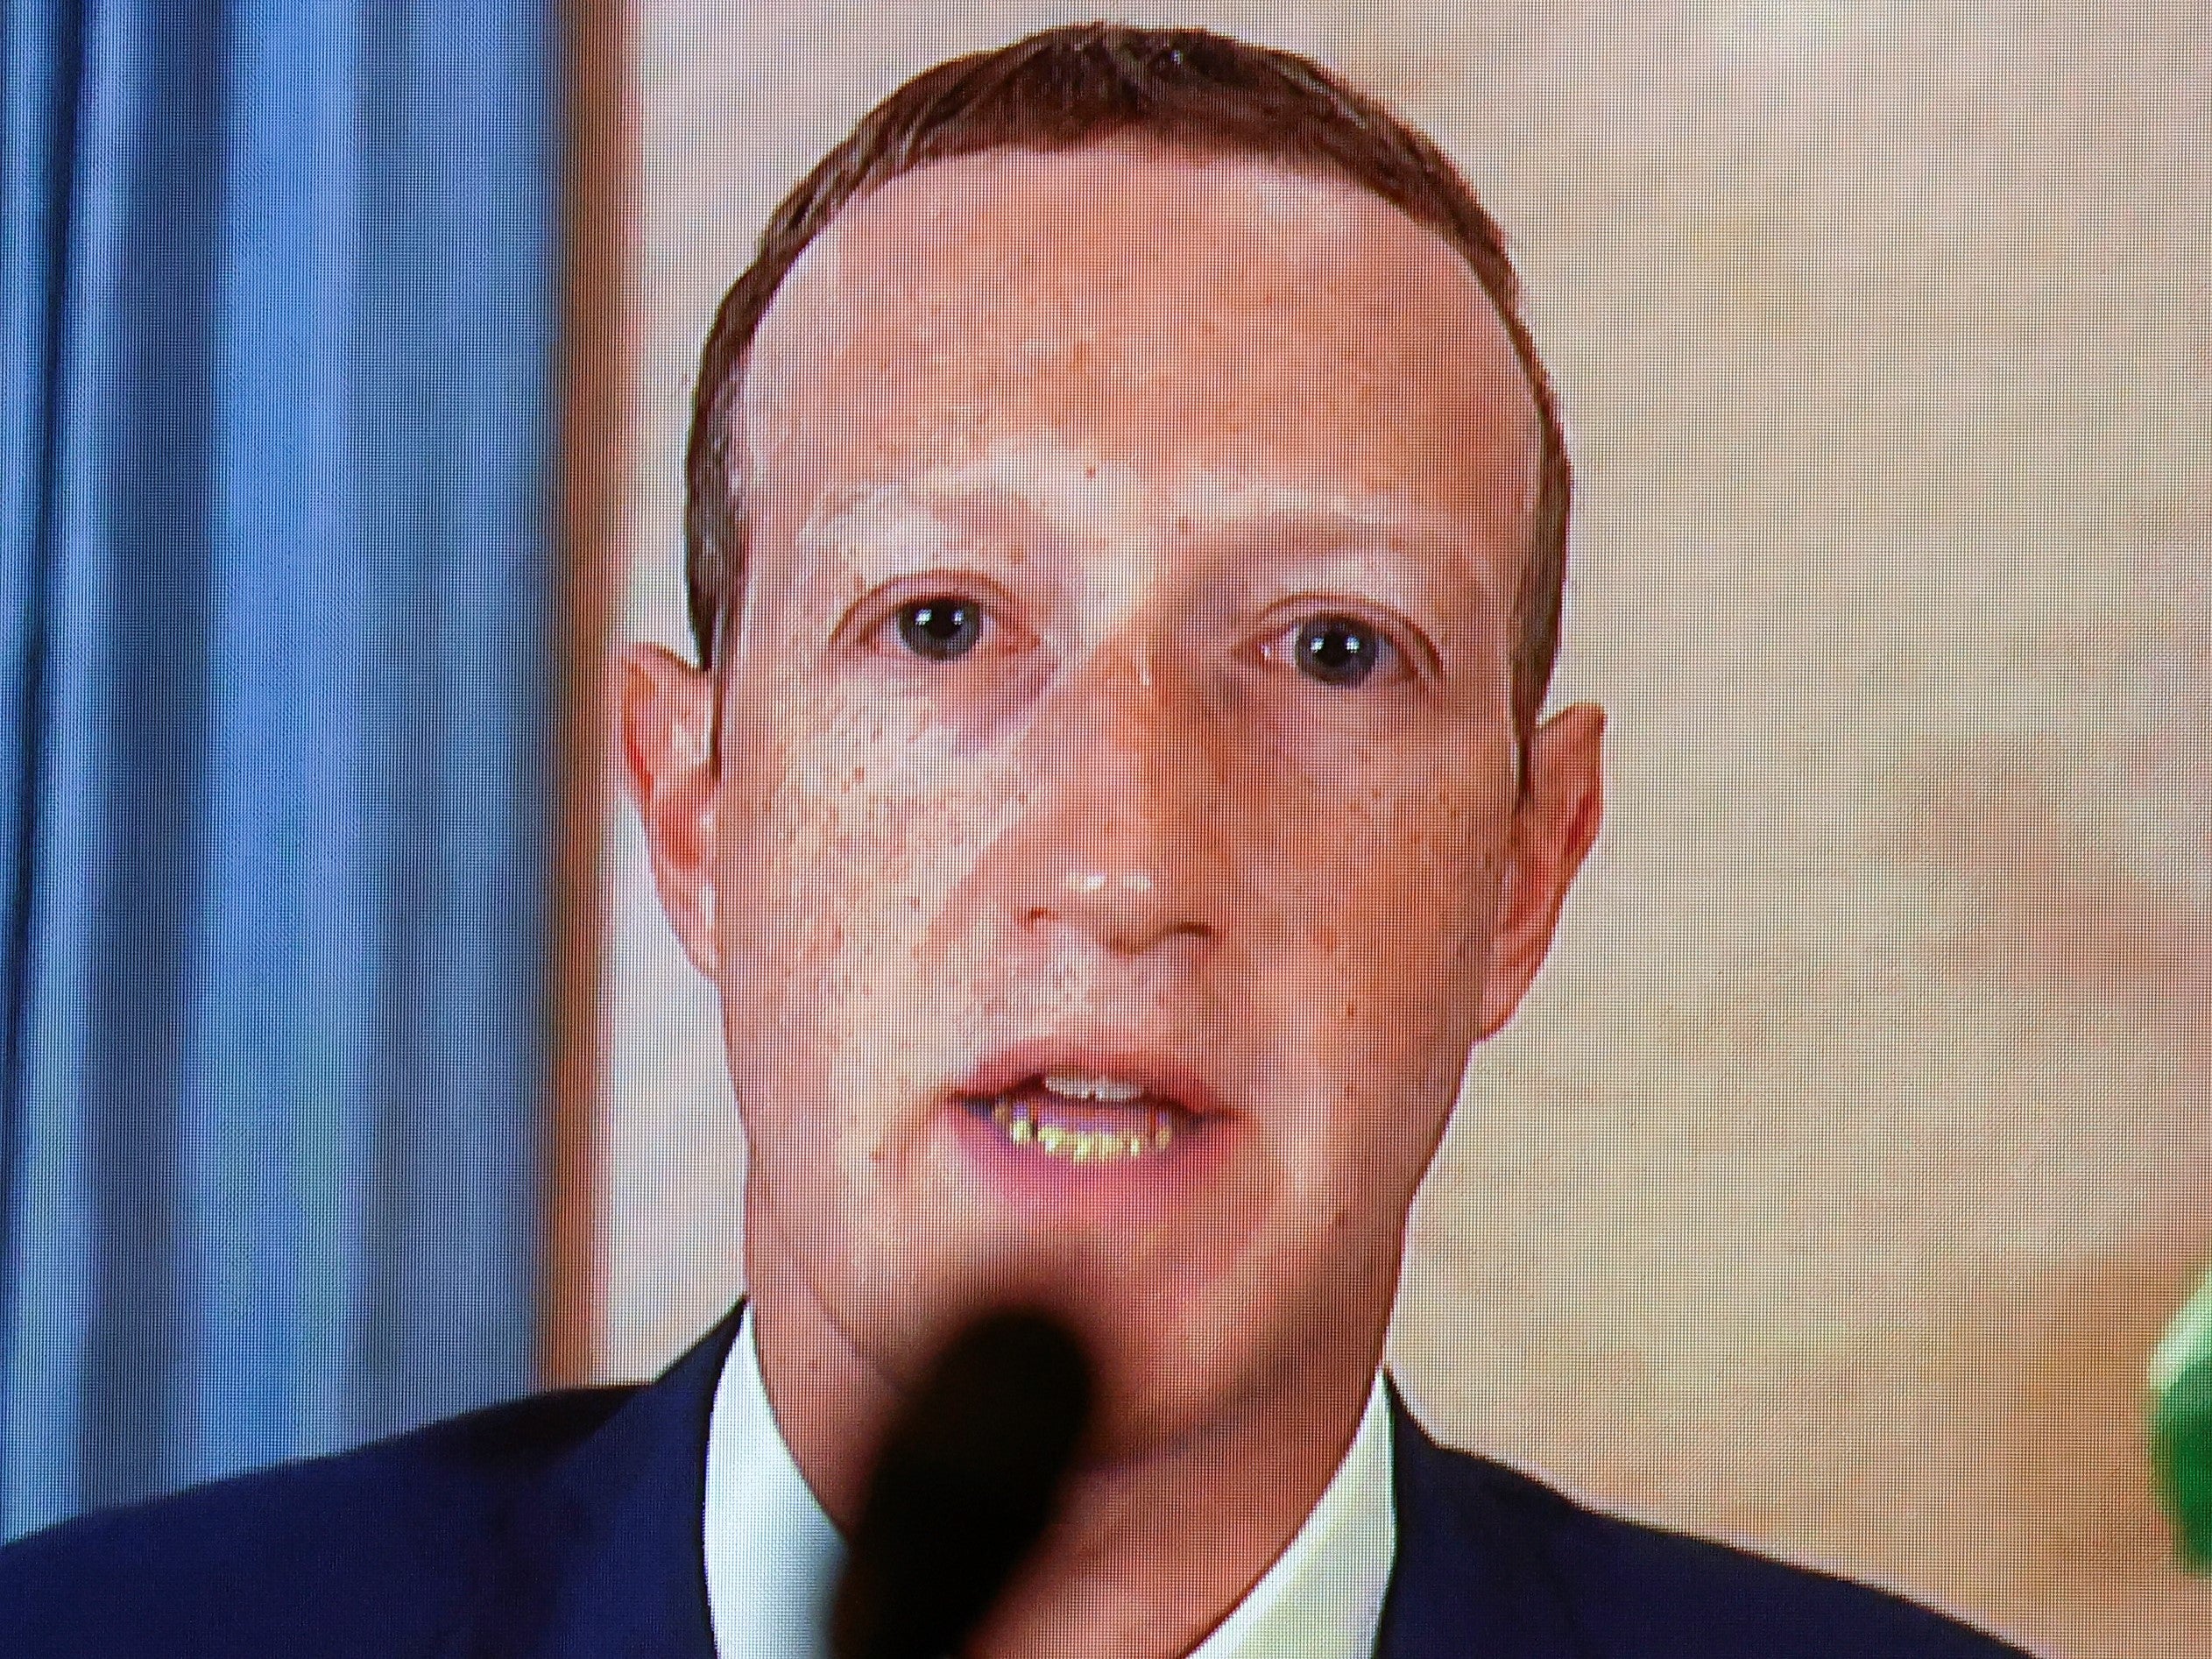 Mark Zuckerberg testifies remotely during a Senate Judiciary Committee hearing on Capitol Hill on 17 November, 2020 in Washington, DC